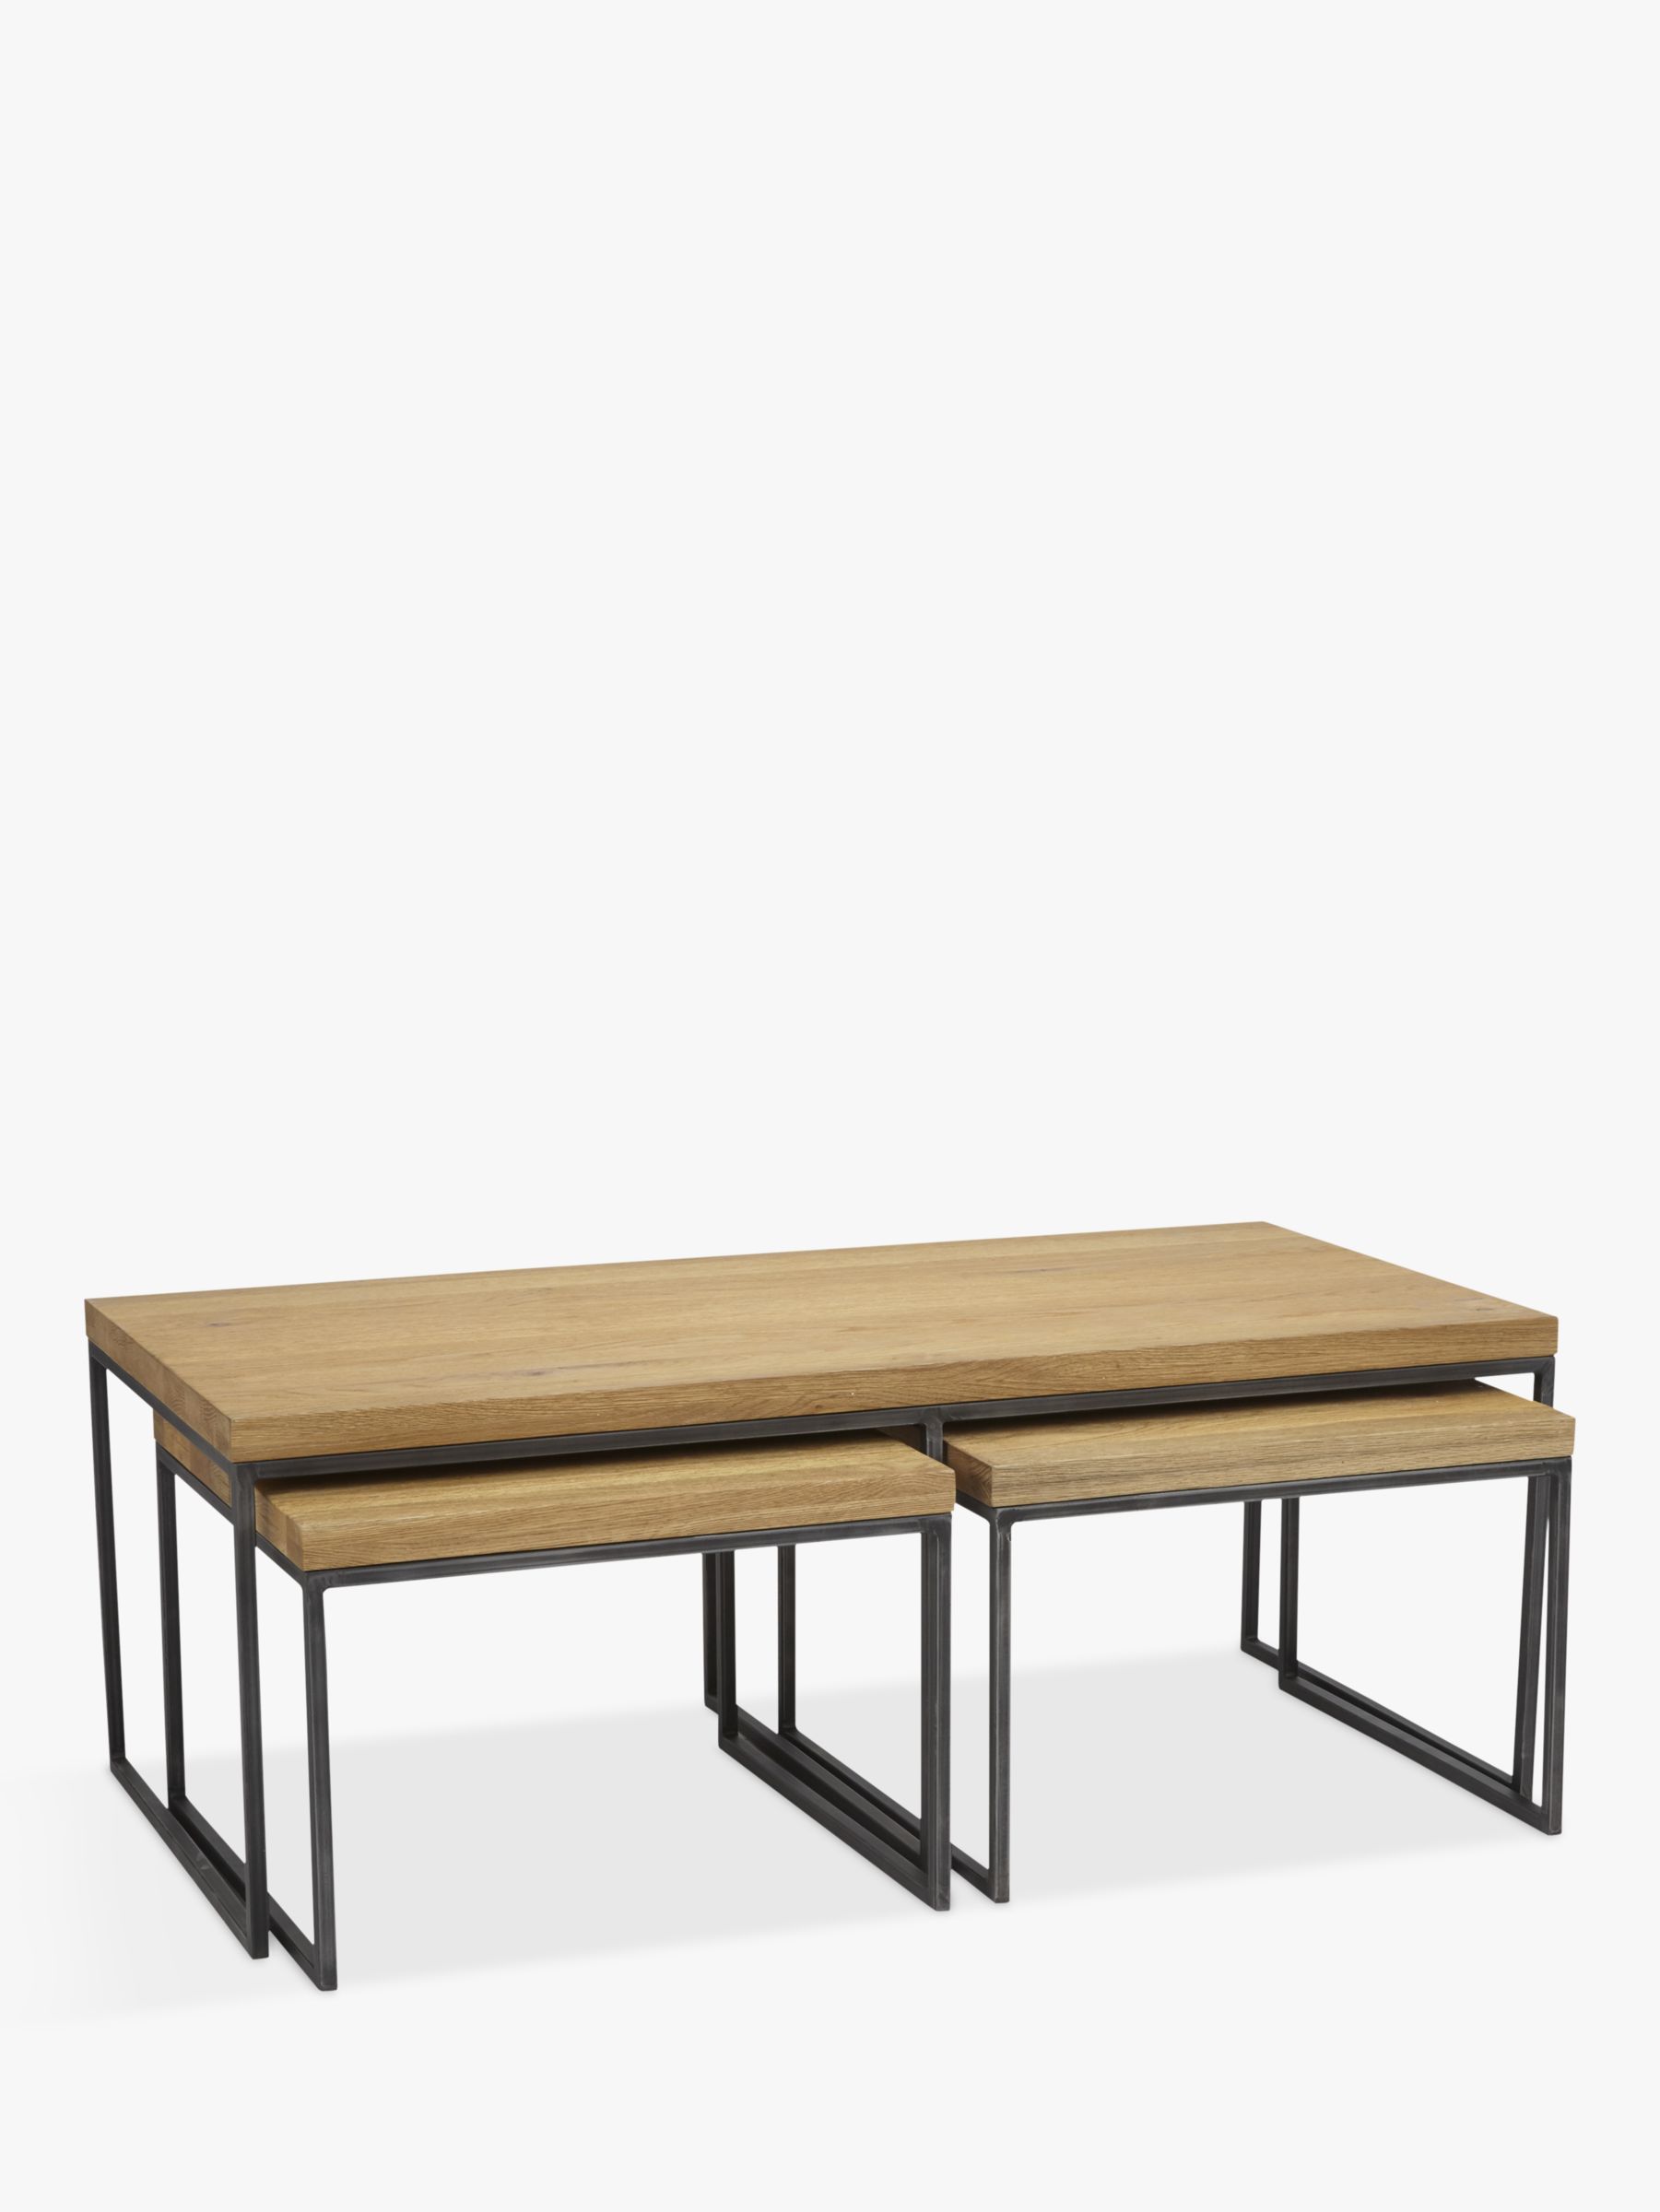 John Lewis Calia Coffee Table with Nest of 2 Tables at John Lewis